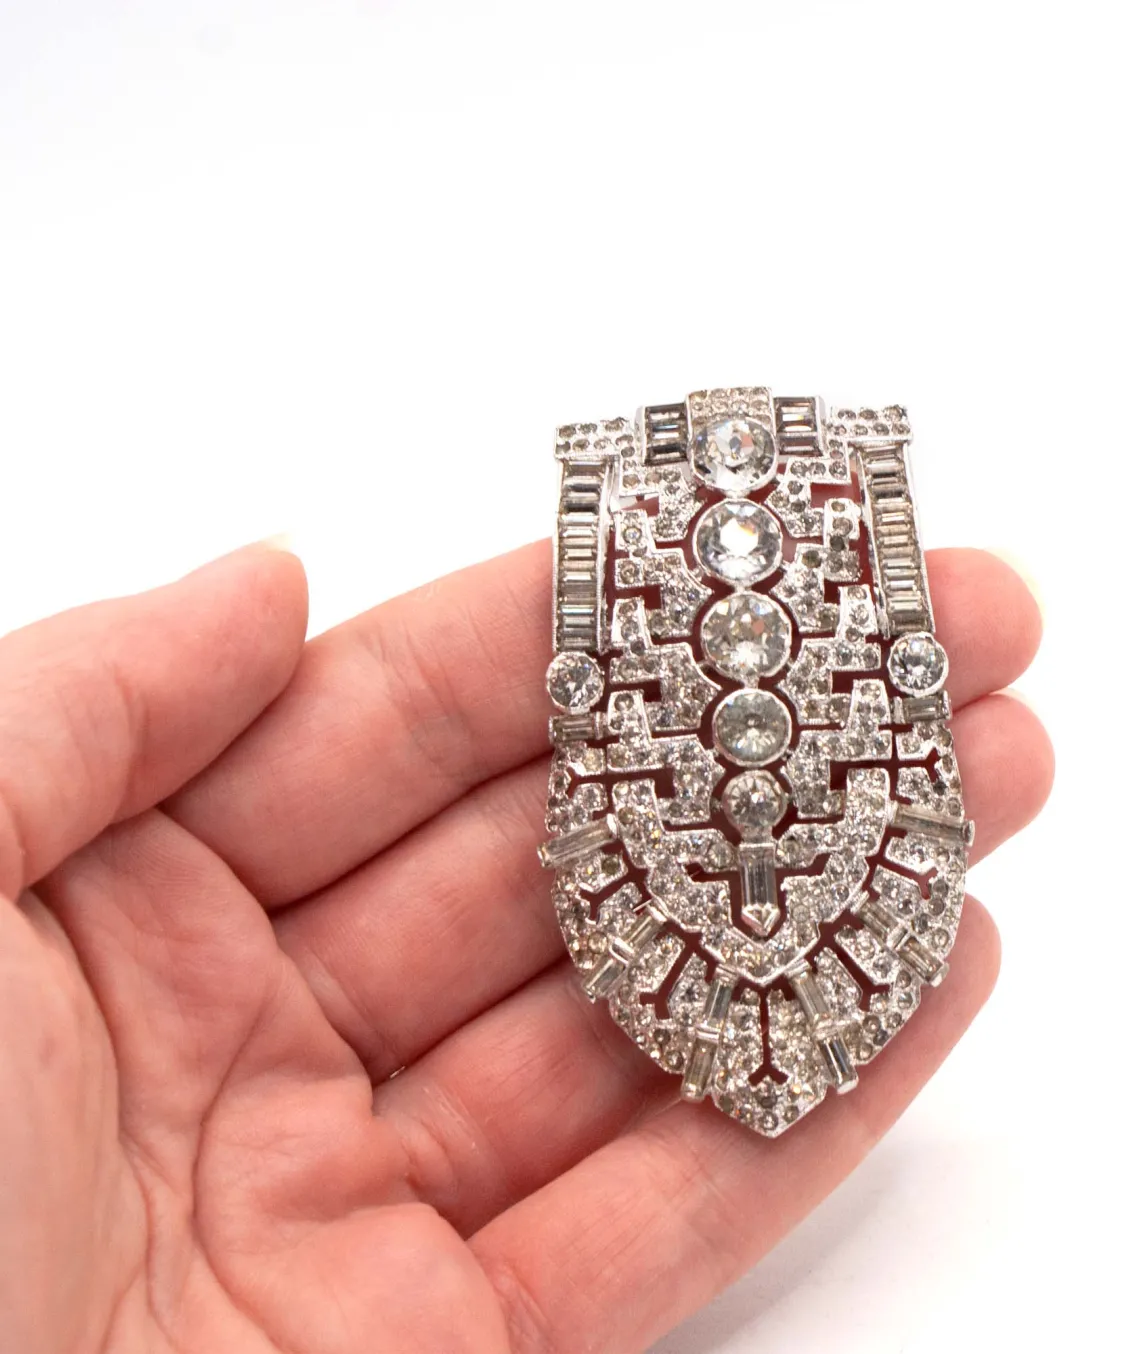 Large Trifari KTF dress clip held in a hand